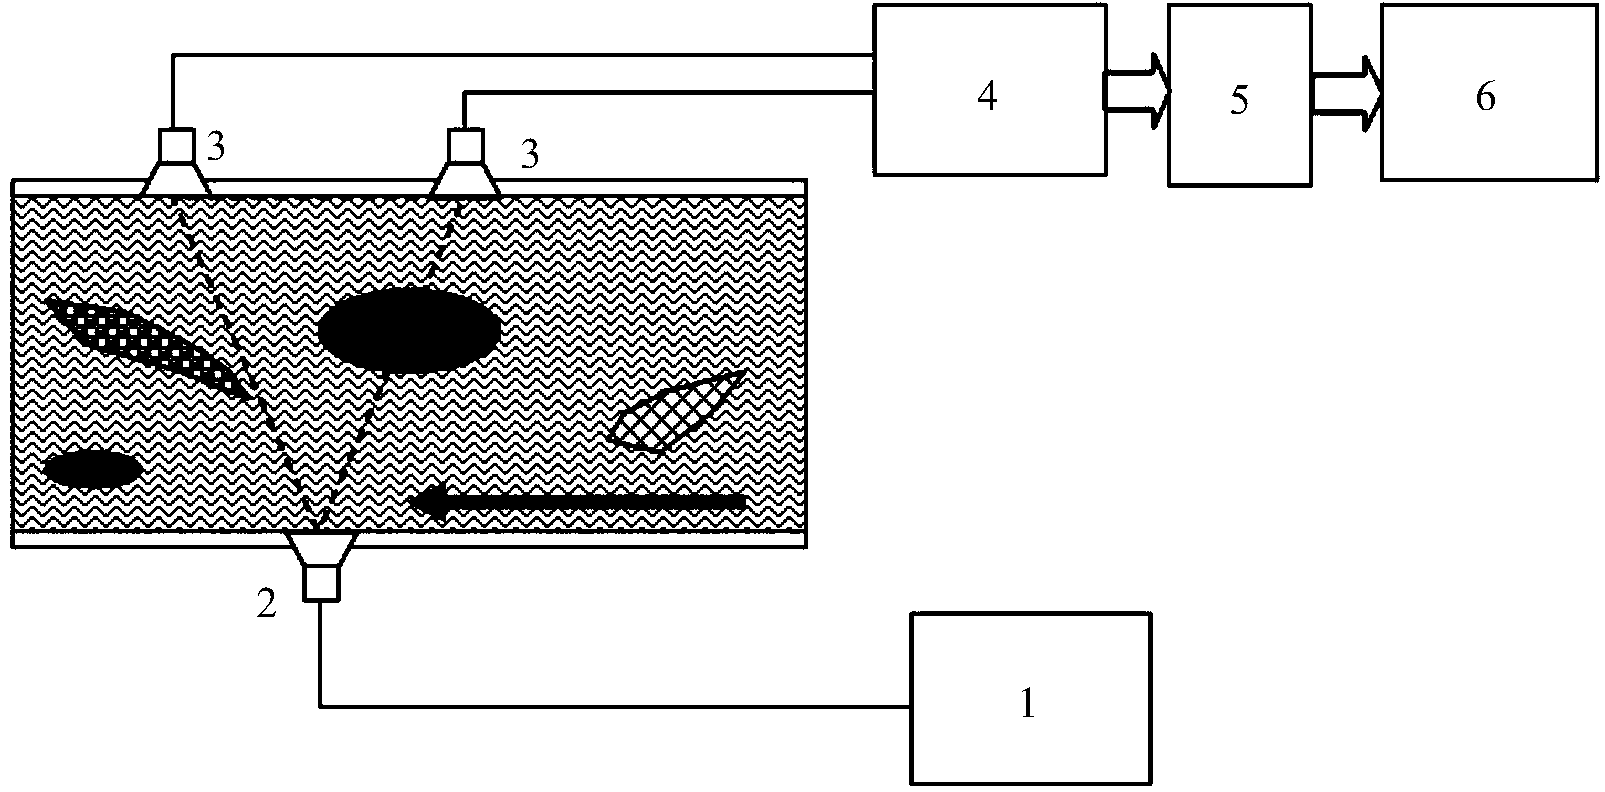 Flow measuring device for sewage containing solid garbage